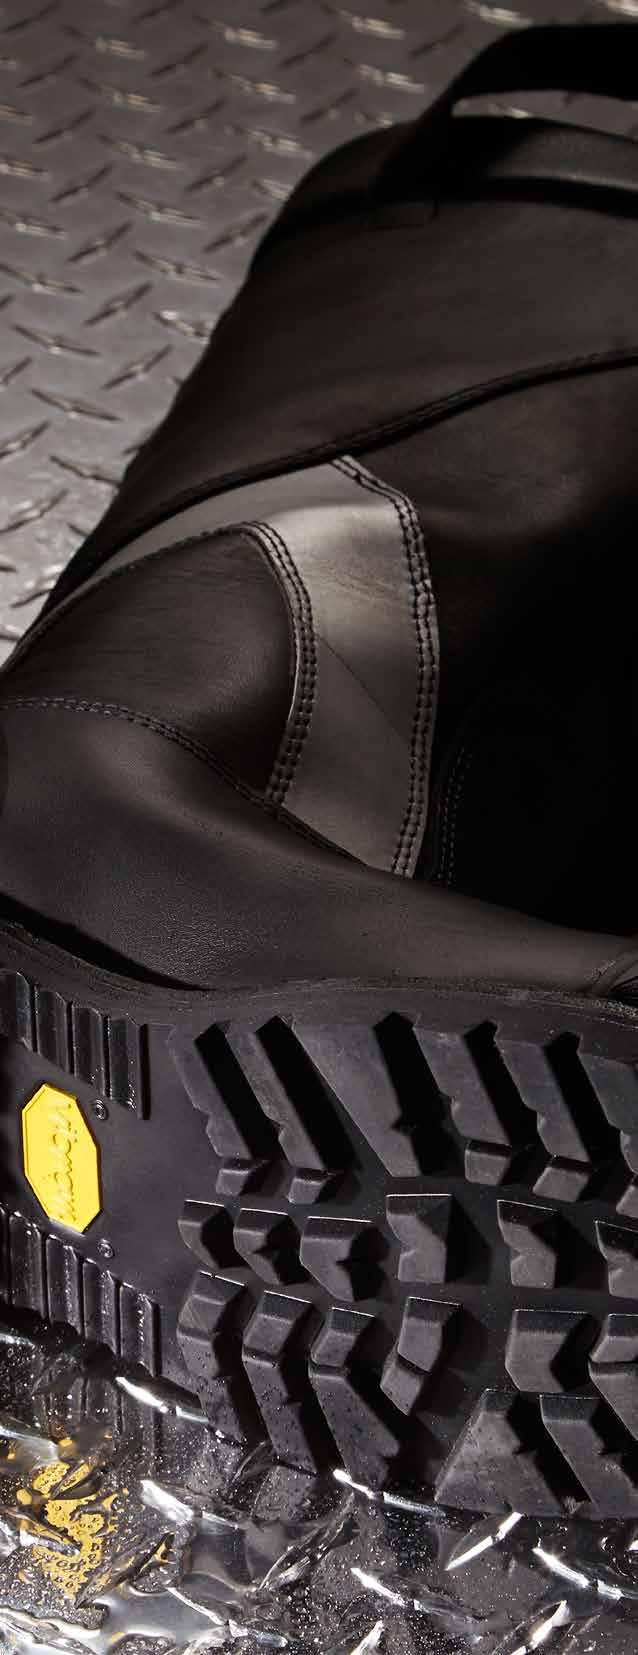 Marshall & Commander Fire Boots Unique Marshall Boot Features 14 High Pull-On Design Slip-resistant, breathable micro-fiber technology protective heel strip enhances foot stability and minimizes wear